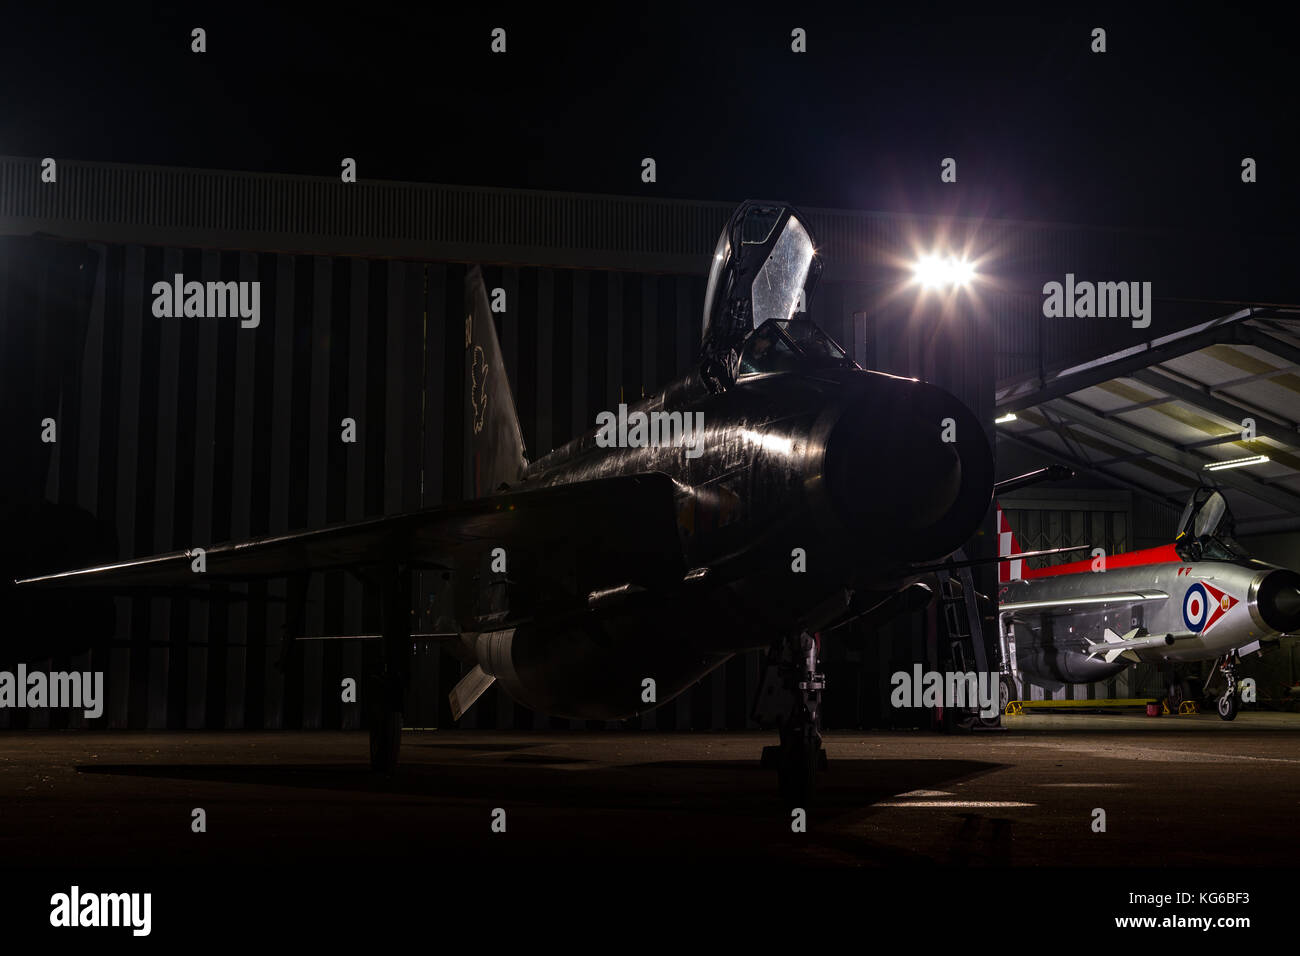 English Electric Lightning aircraft shot at night as part of an evening event in November 2017, Bruntingthorpe, Leicestershire, UK Stock Photo